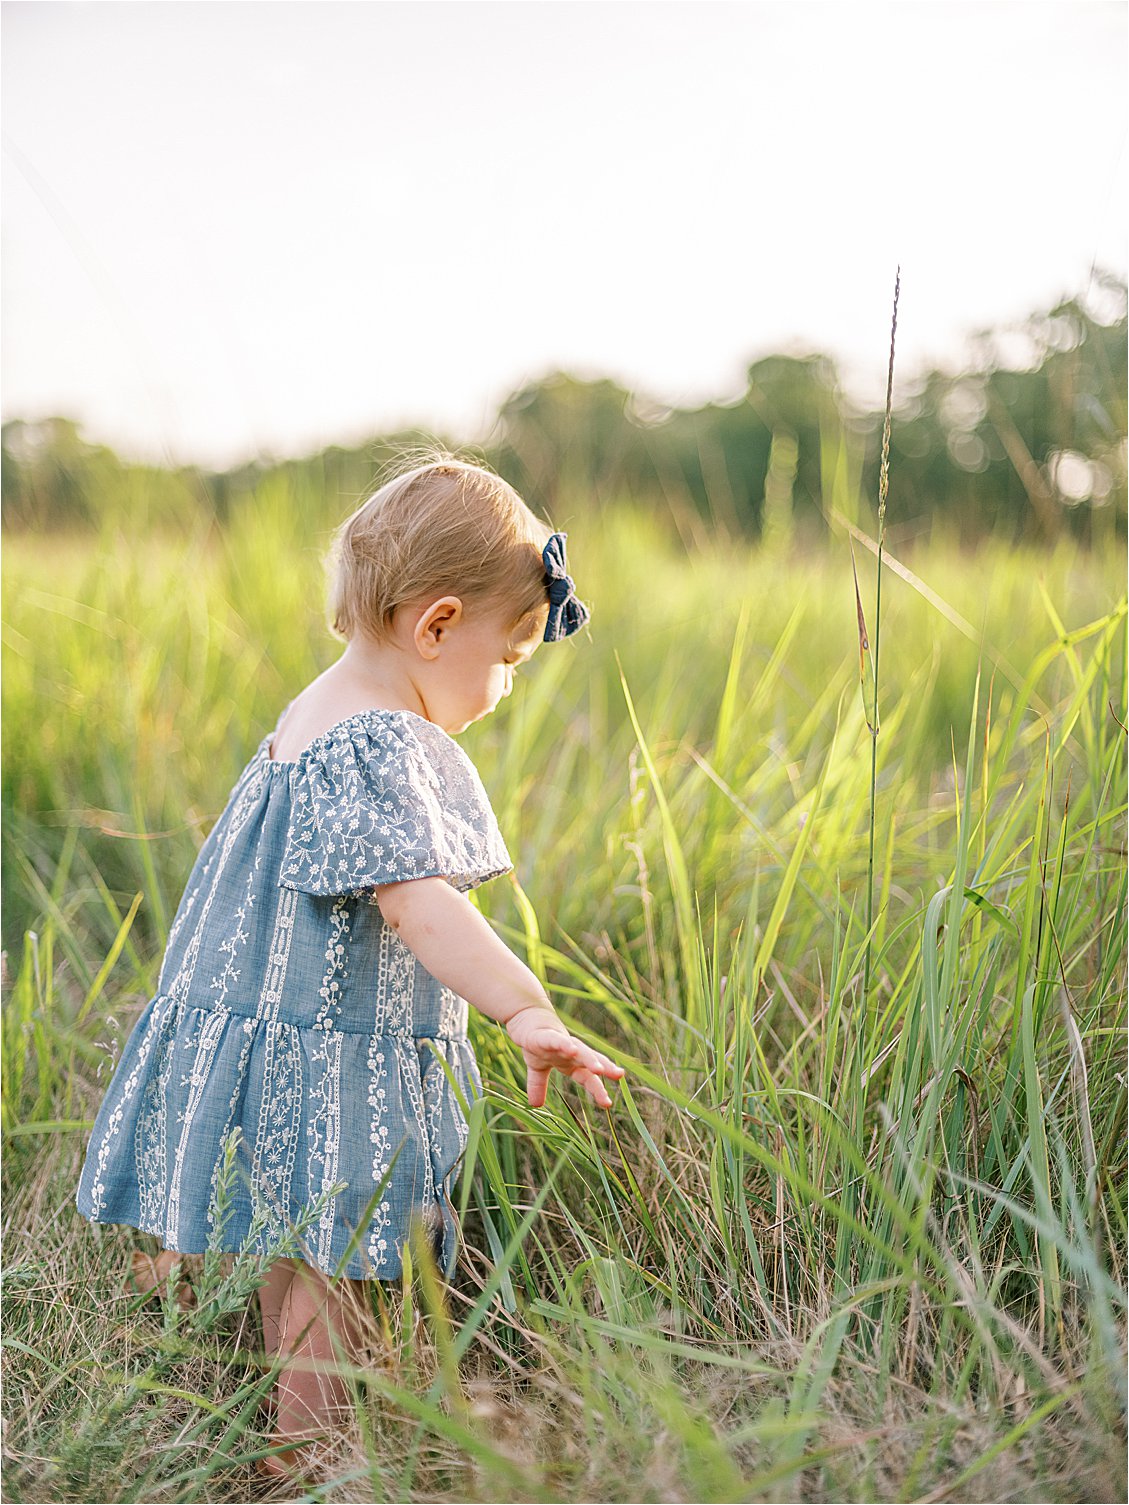 Summer Maryland Family Session on Film by Maryland & Destination Film Family Photographer Renee Hollingshead at Soldier's Delight